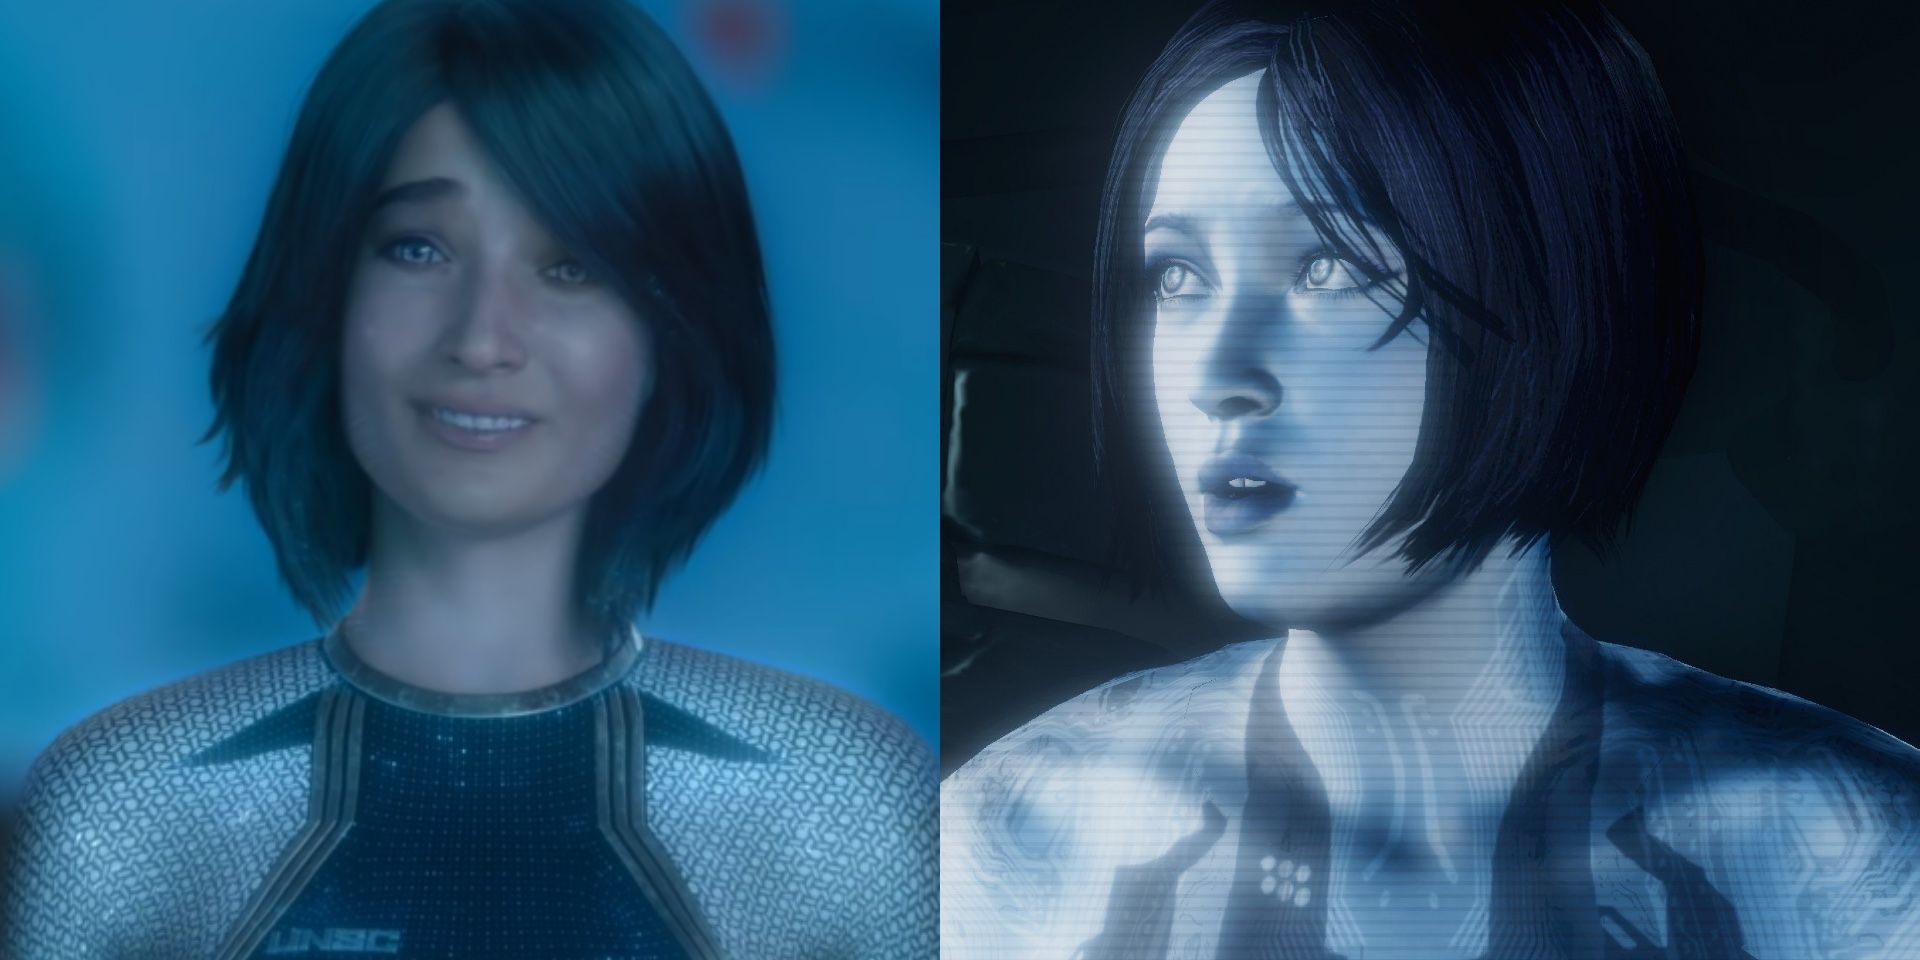 Cortana in the Halo TV show and game